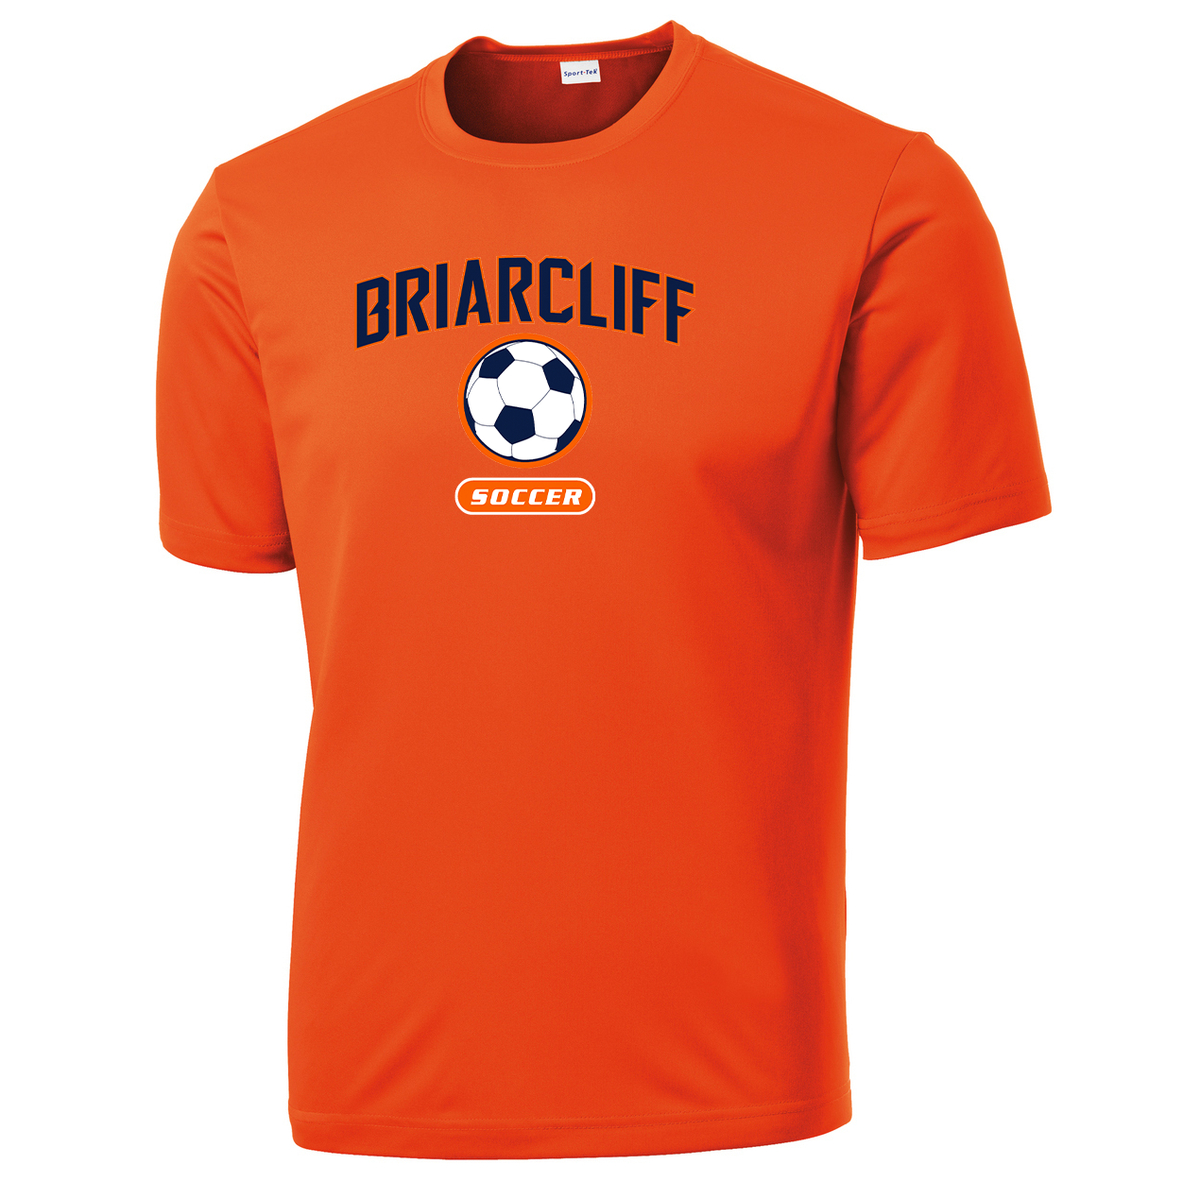 Briarcliff Soccer Performance T-Shirt